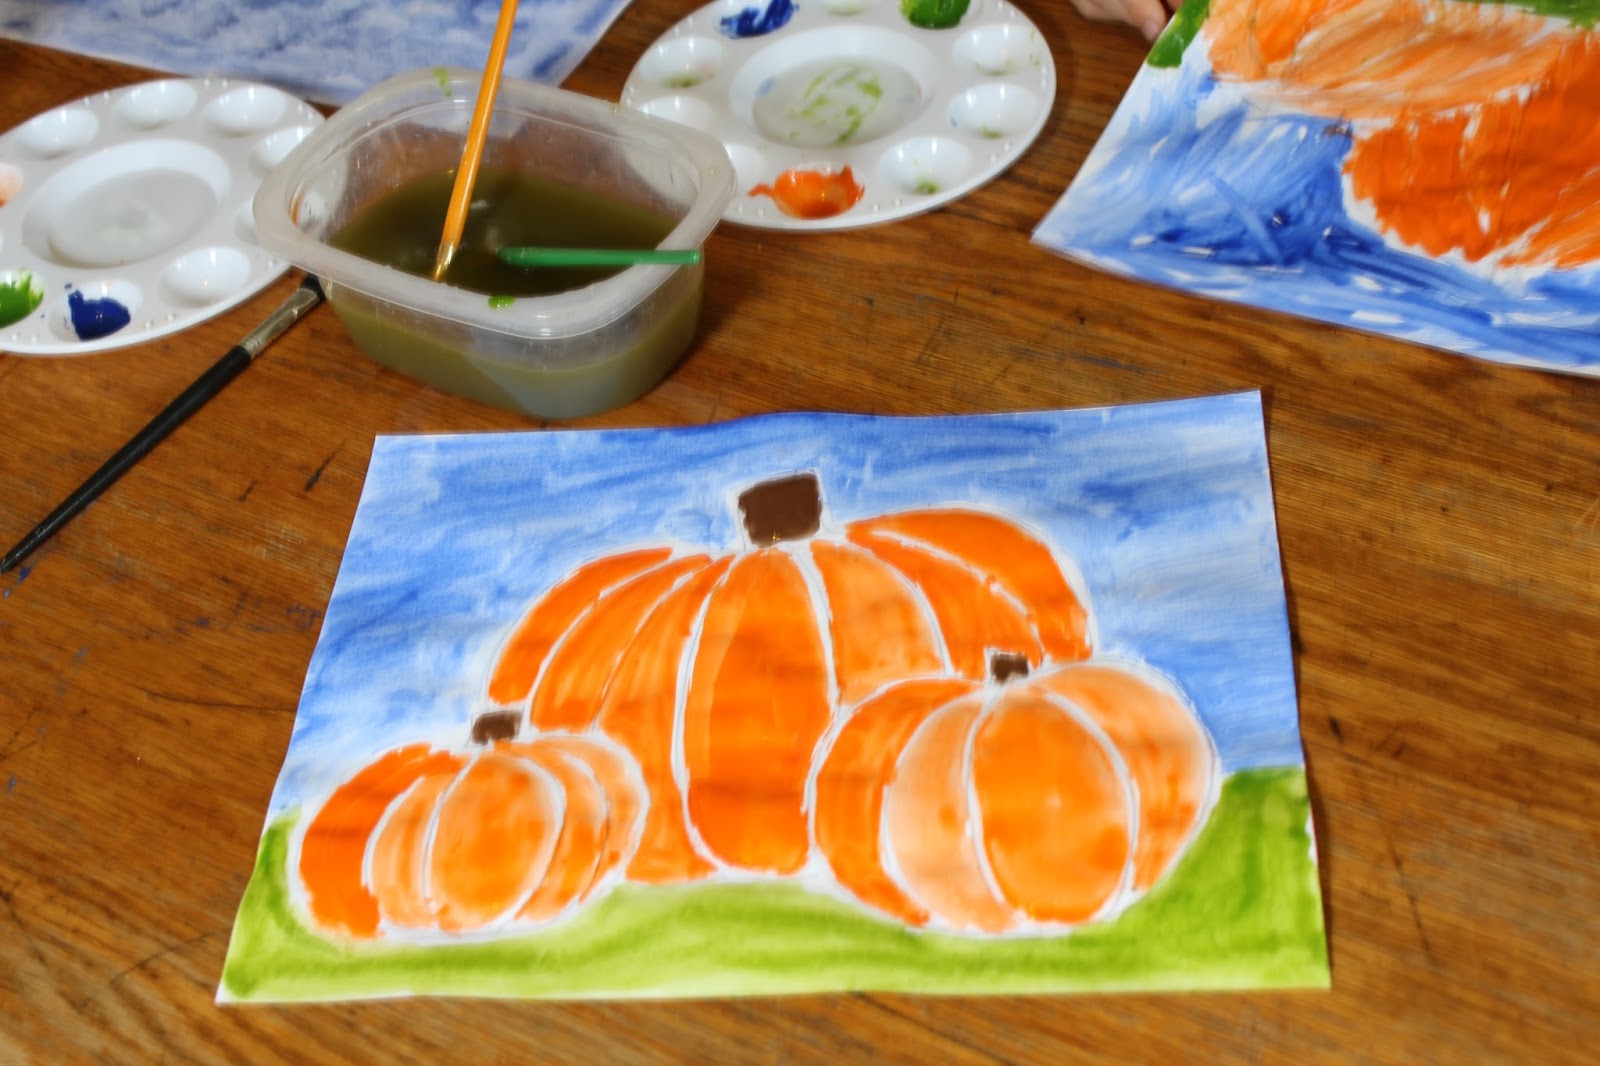 The Unlikely Homeschool: 6 Simple Summertime Art Projects for Kids